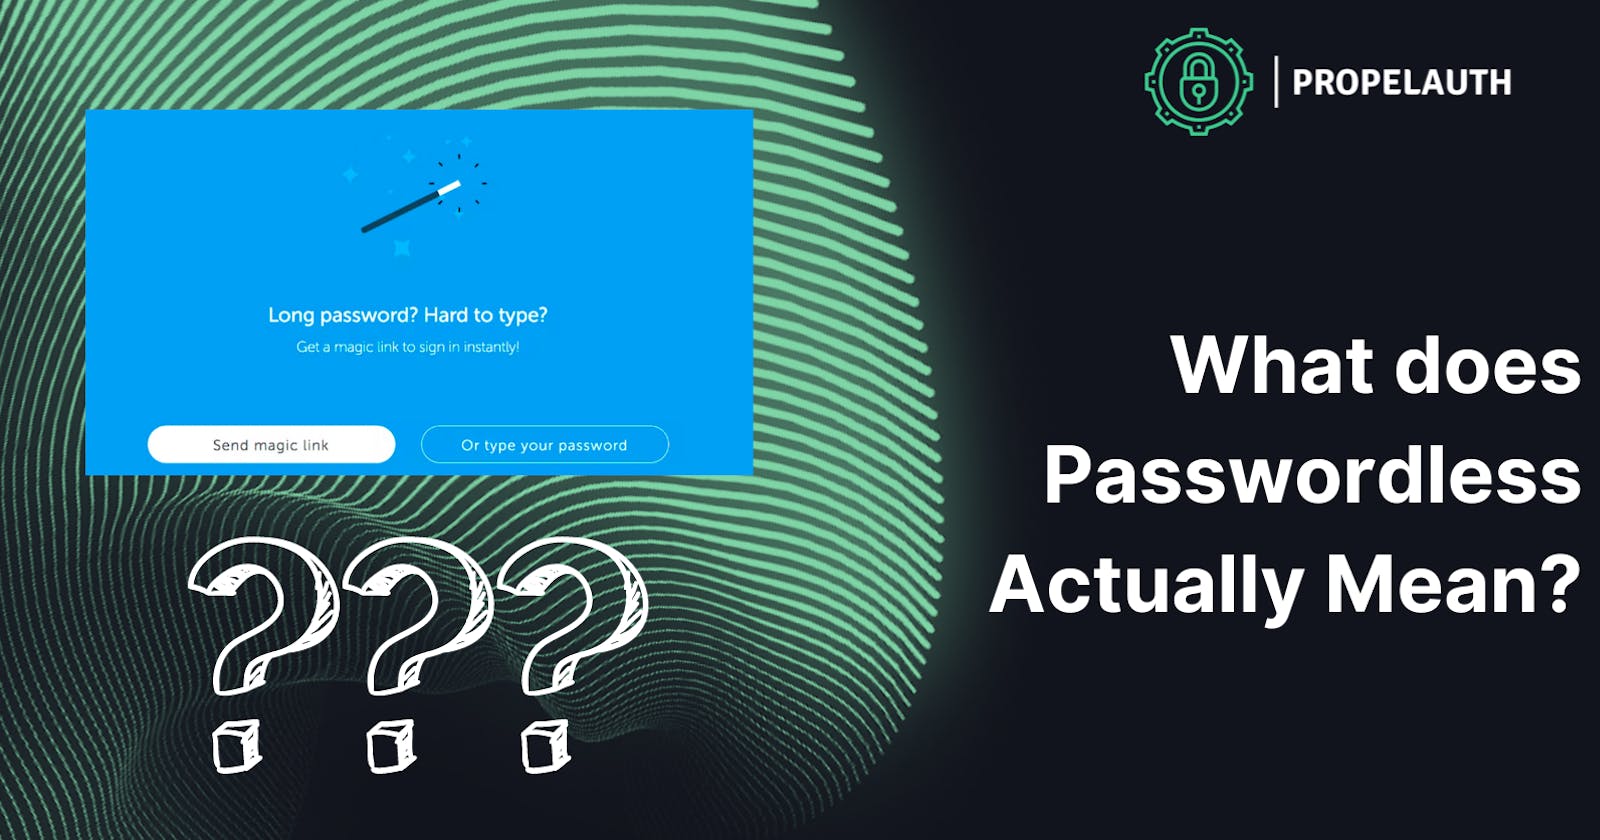 What Does Passwordless Actually Mean?